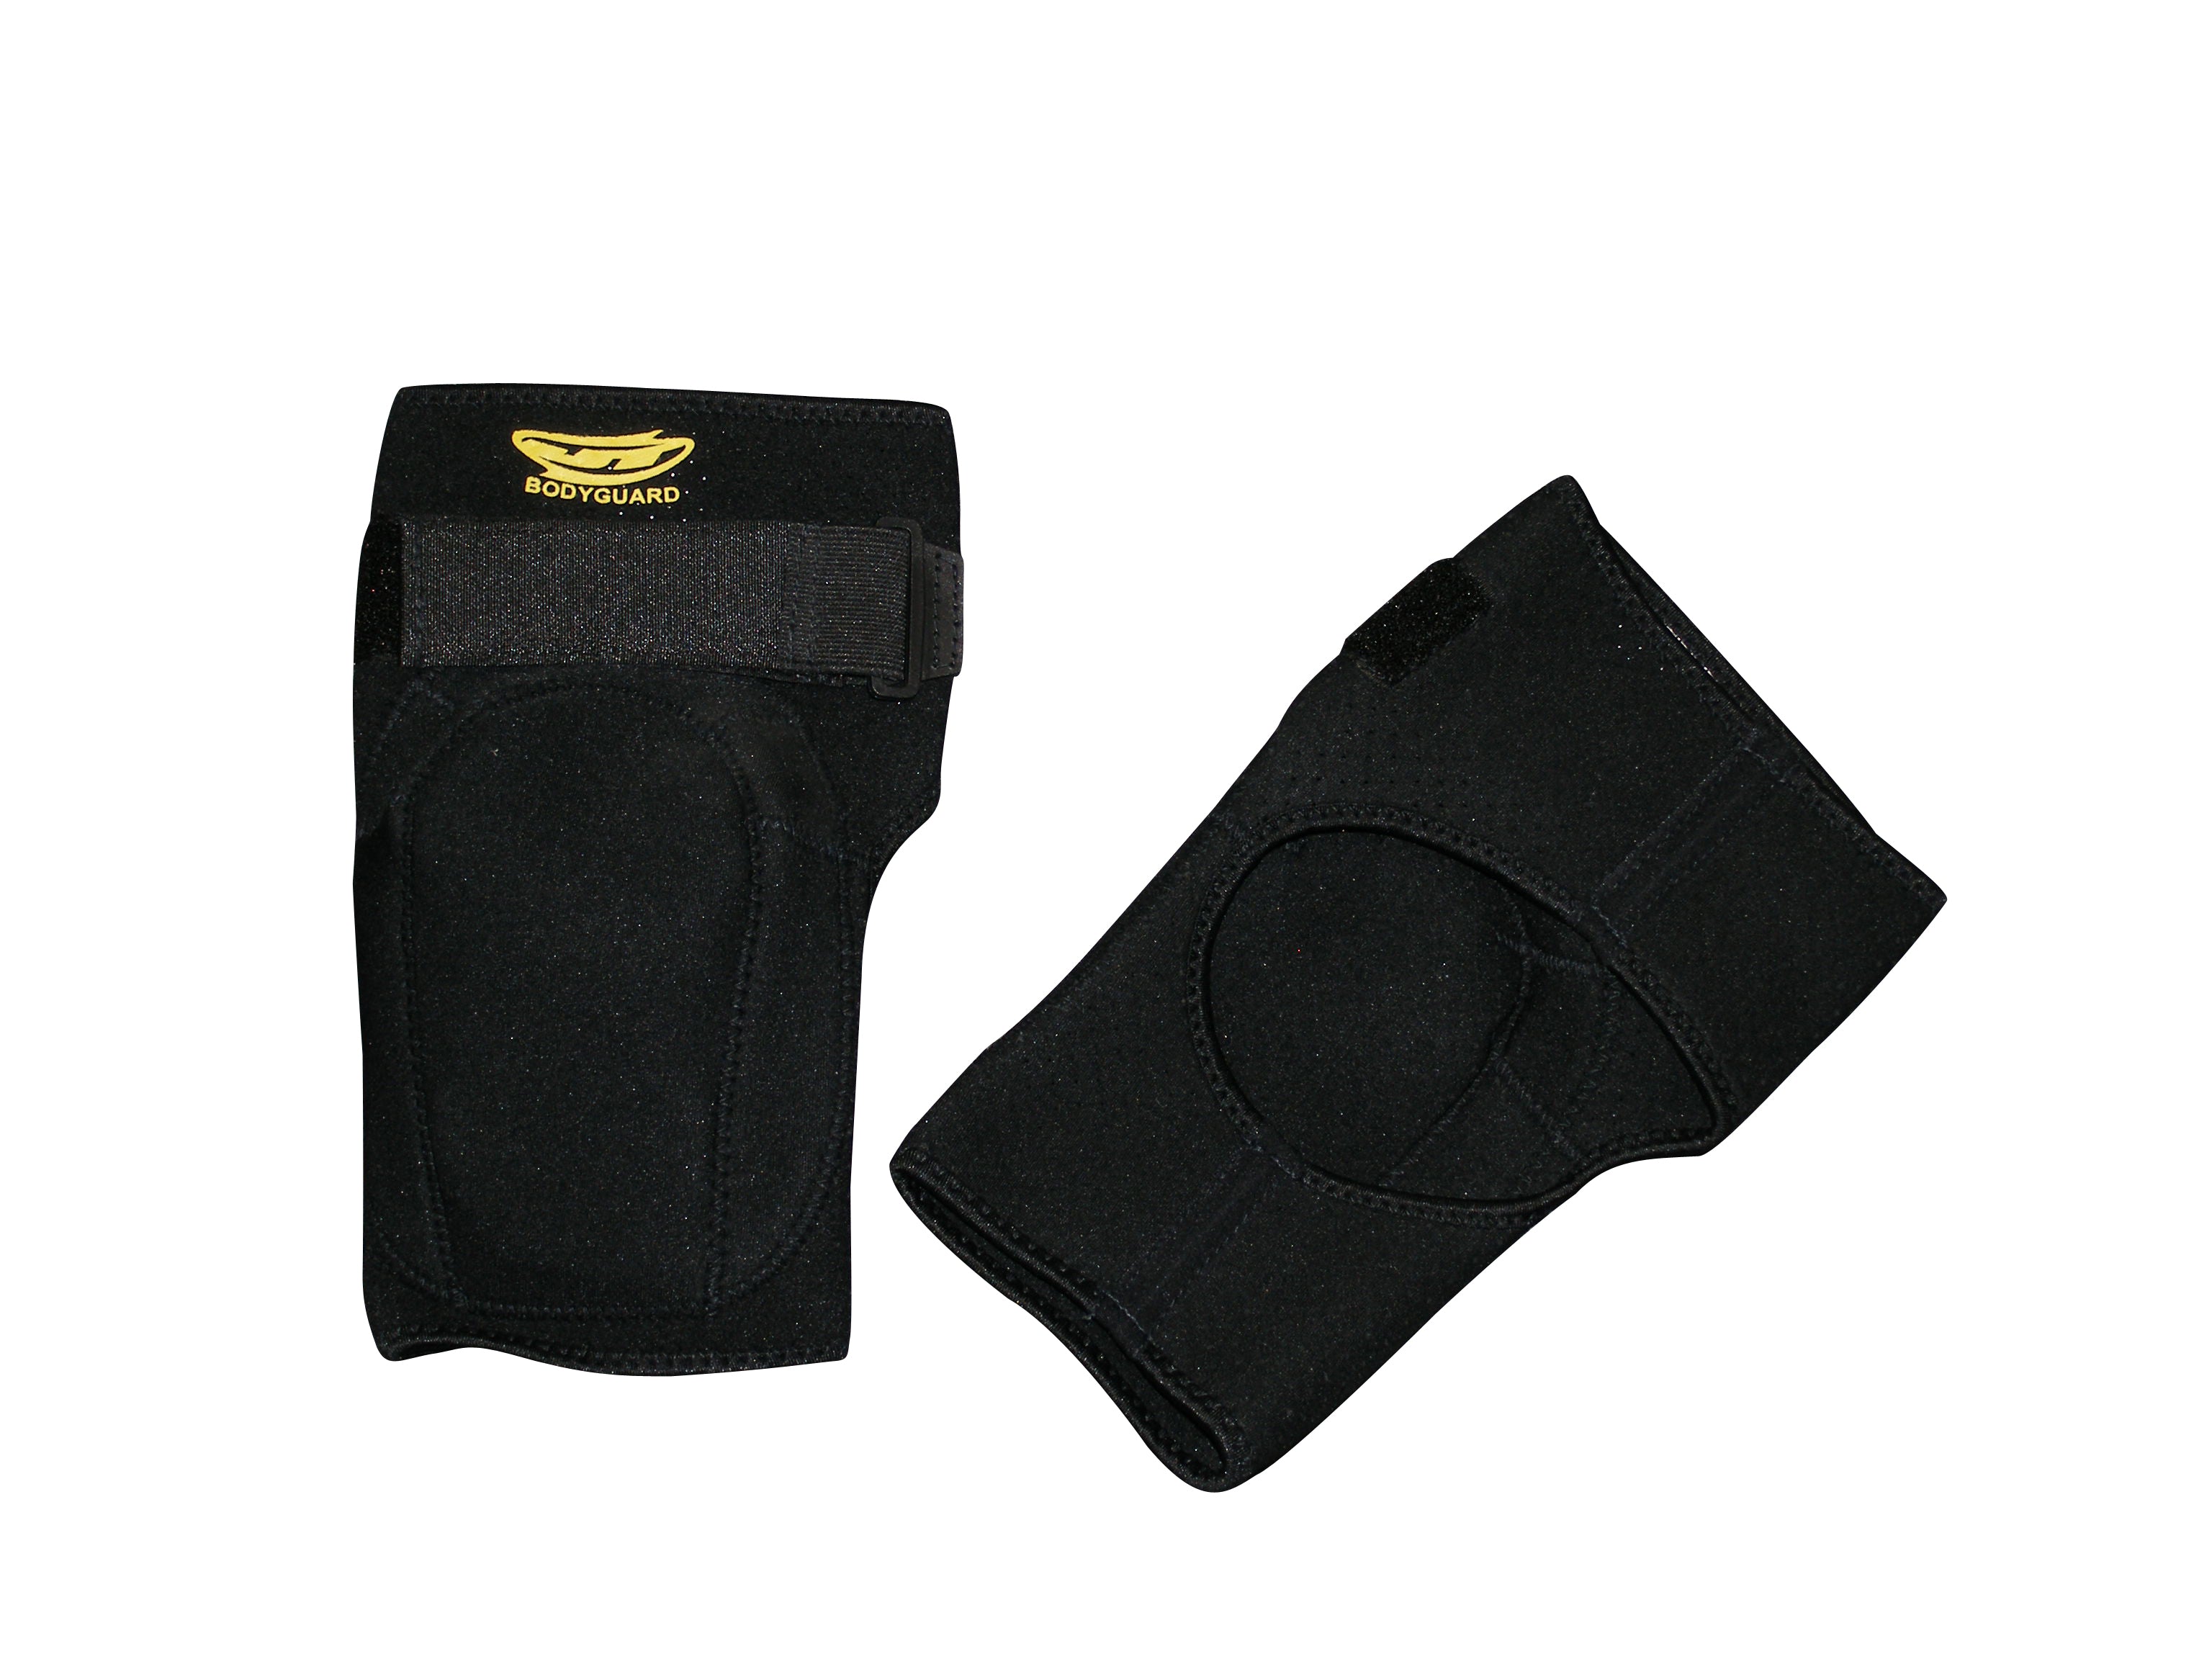 JT USA Neoprene Protective Elbow Knee Pads Guards Pair